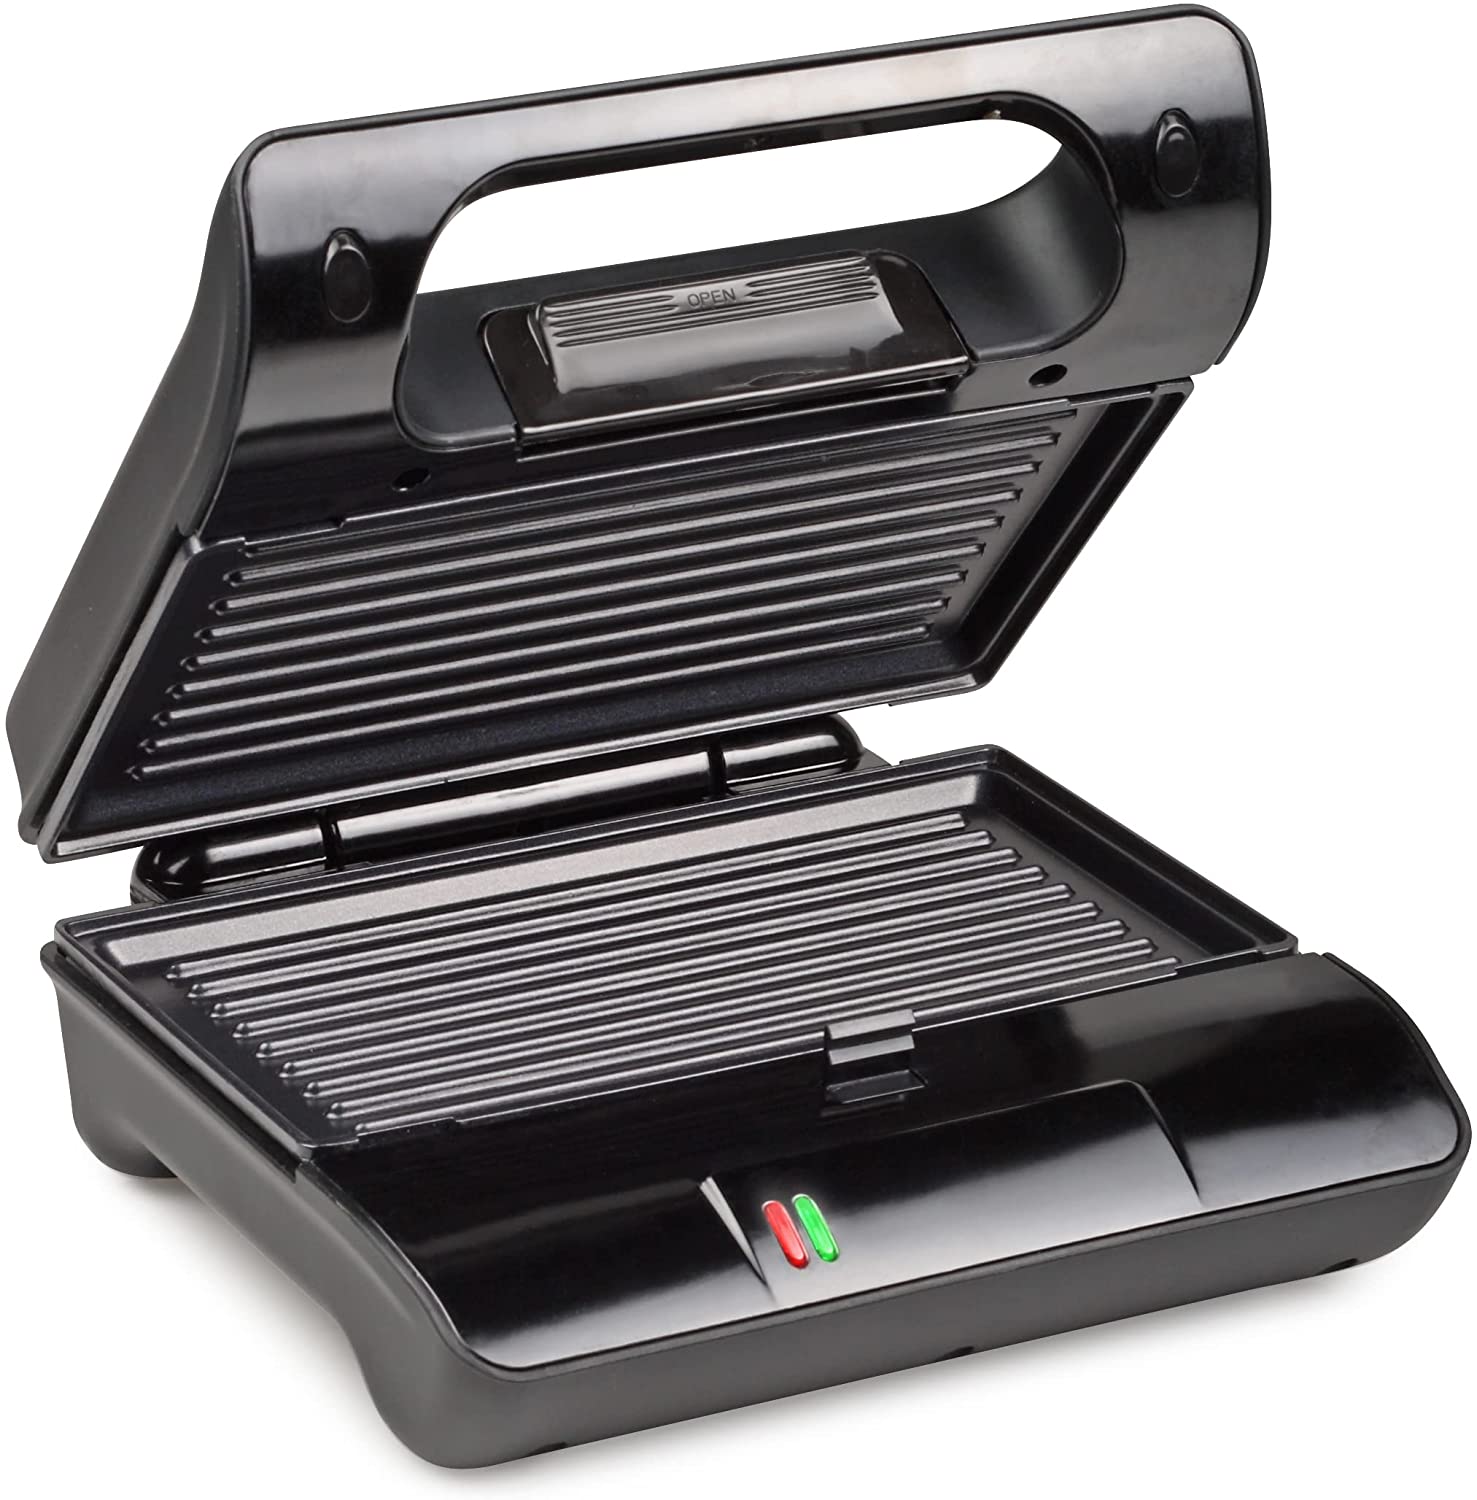 Princess 117000 Compact Grill with Non-Stick Grill Plates Vertical and Horizontal Positioning